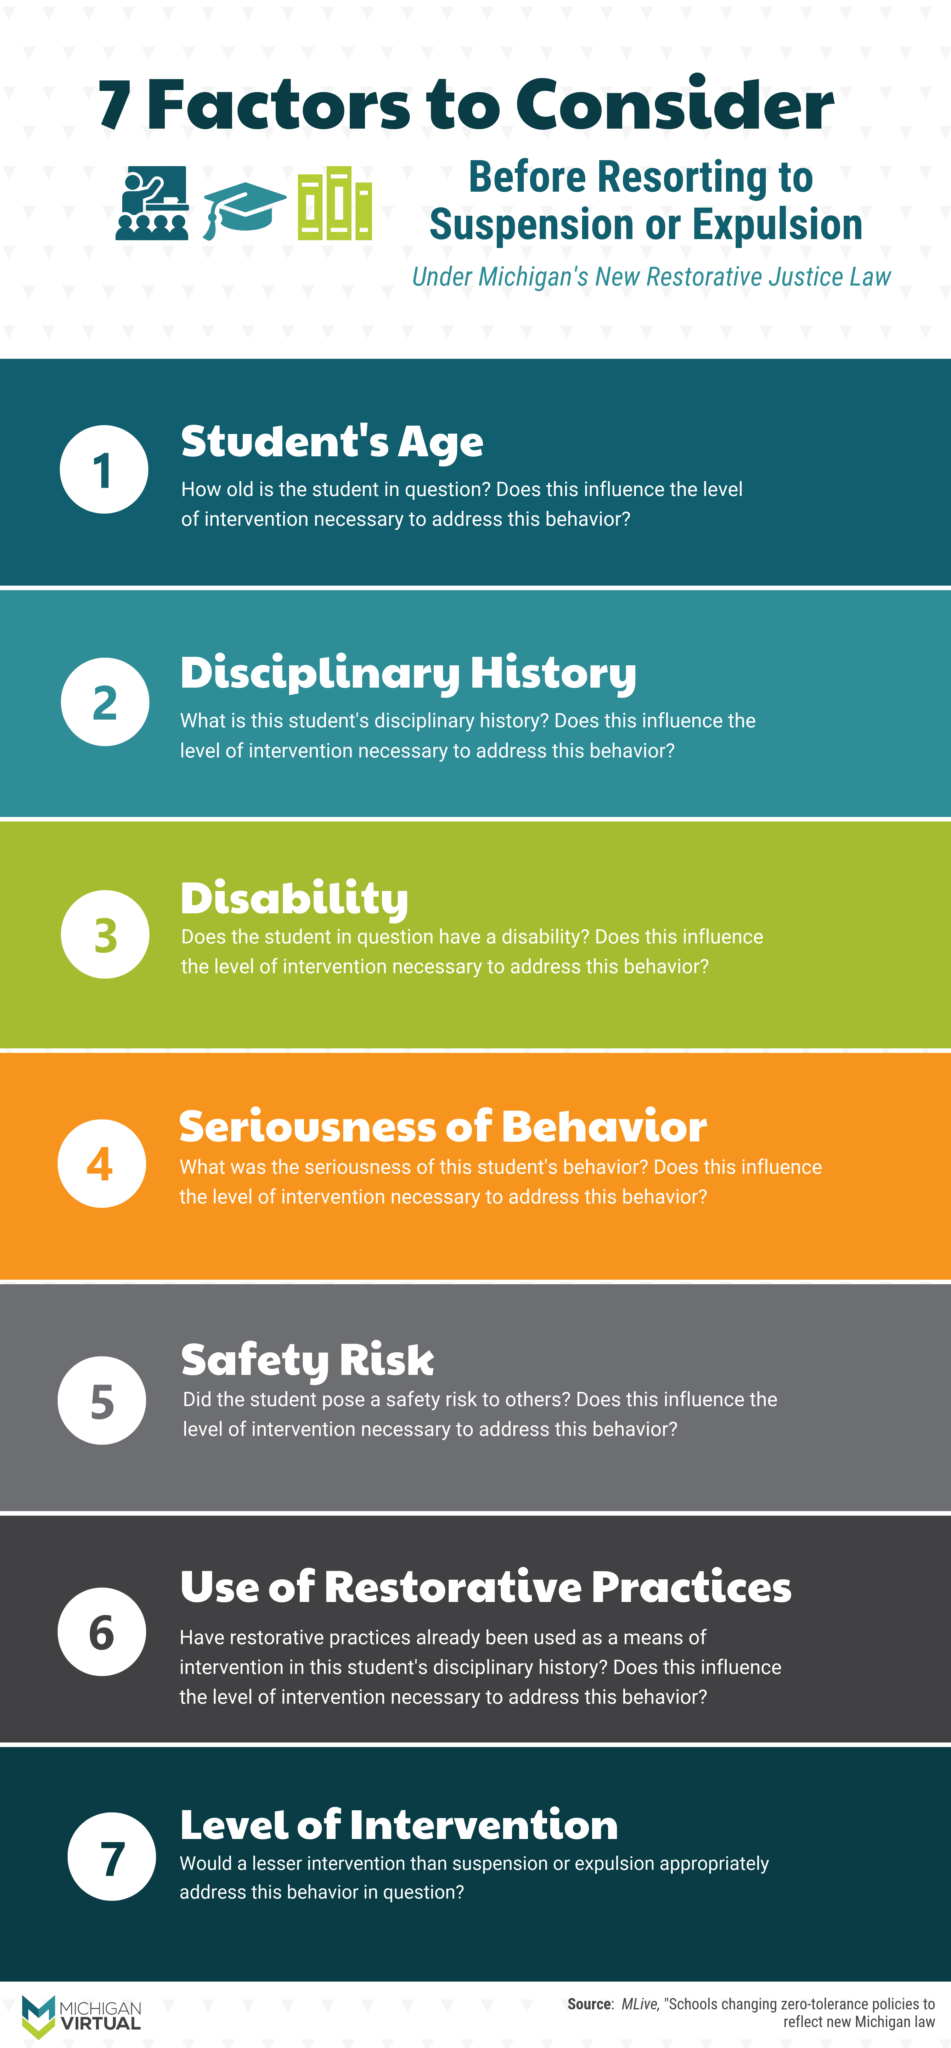 7 factors to consider before resorting to suspension or expulsion under Michigan's new restorative justice law